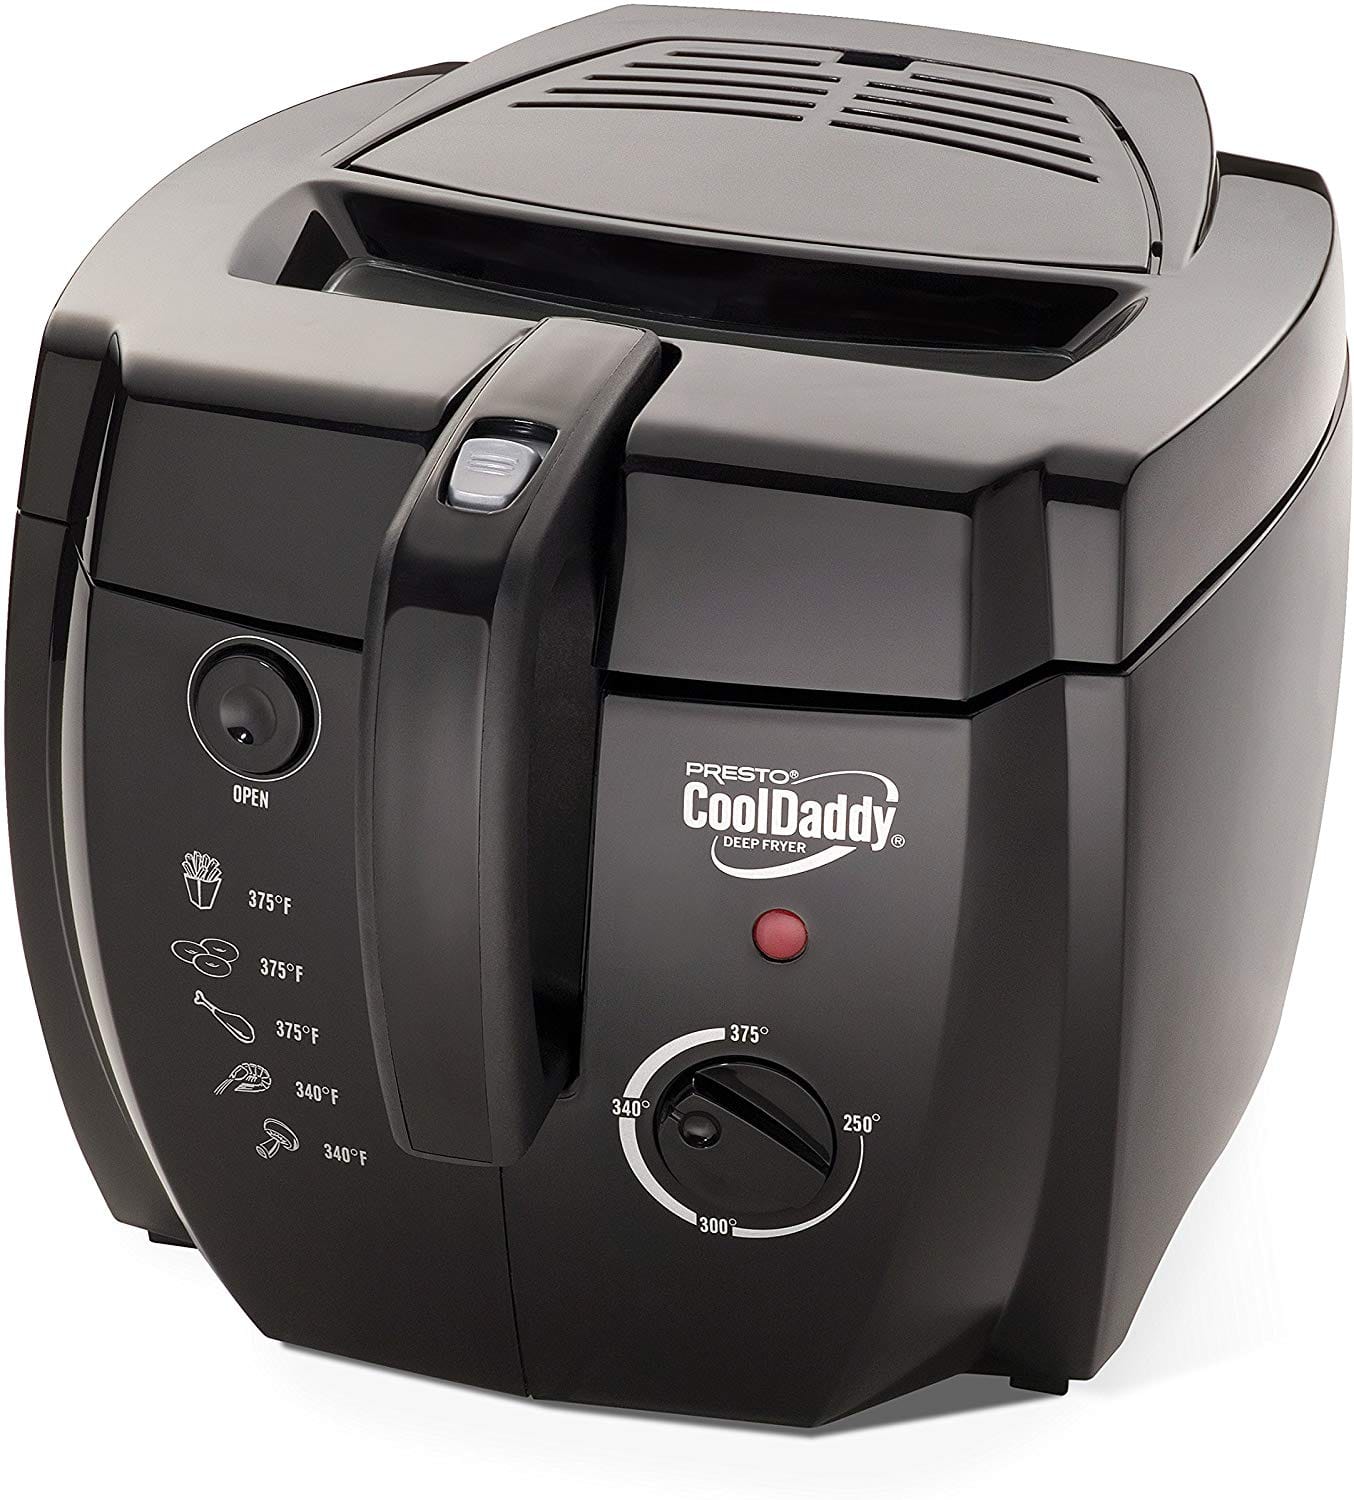 Presto 05442 CoolDaddy Cool-touch Deep Fryer Review